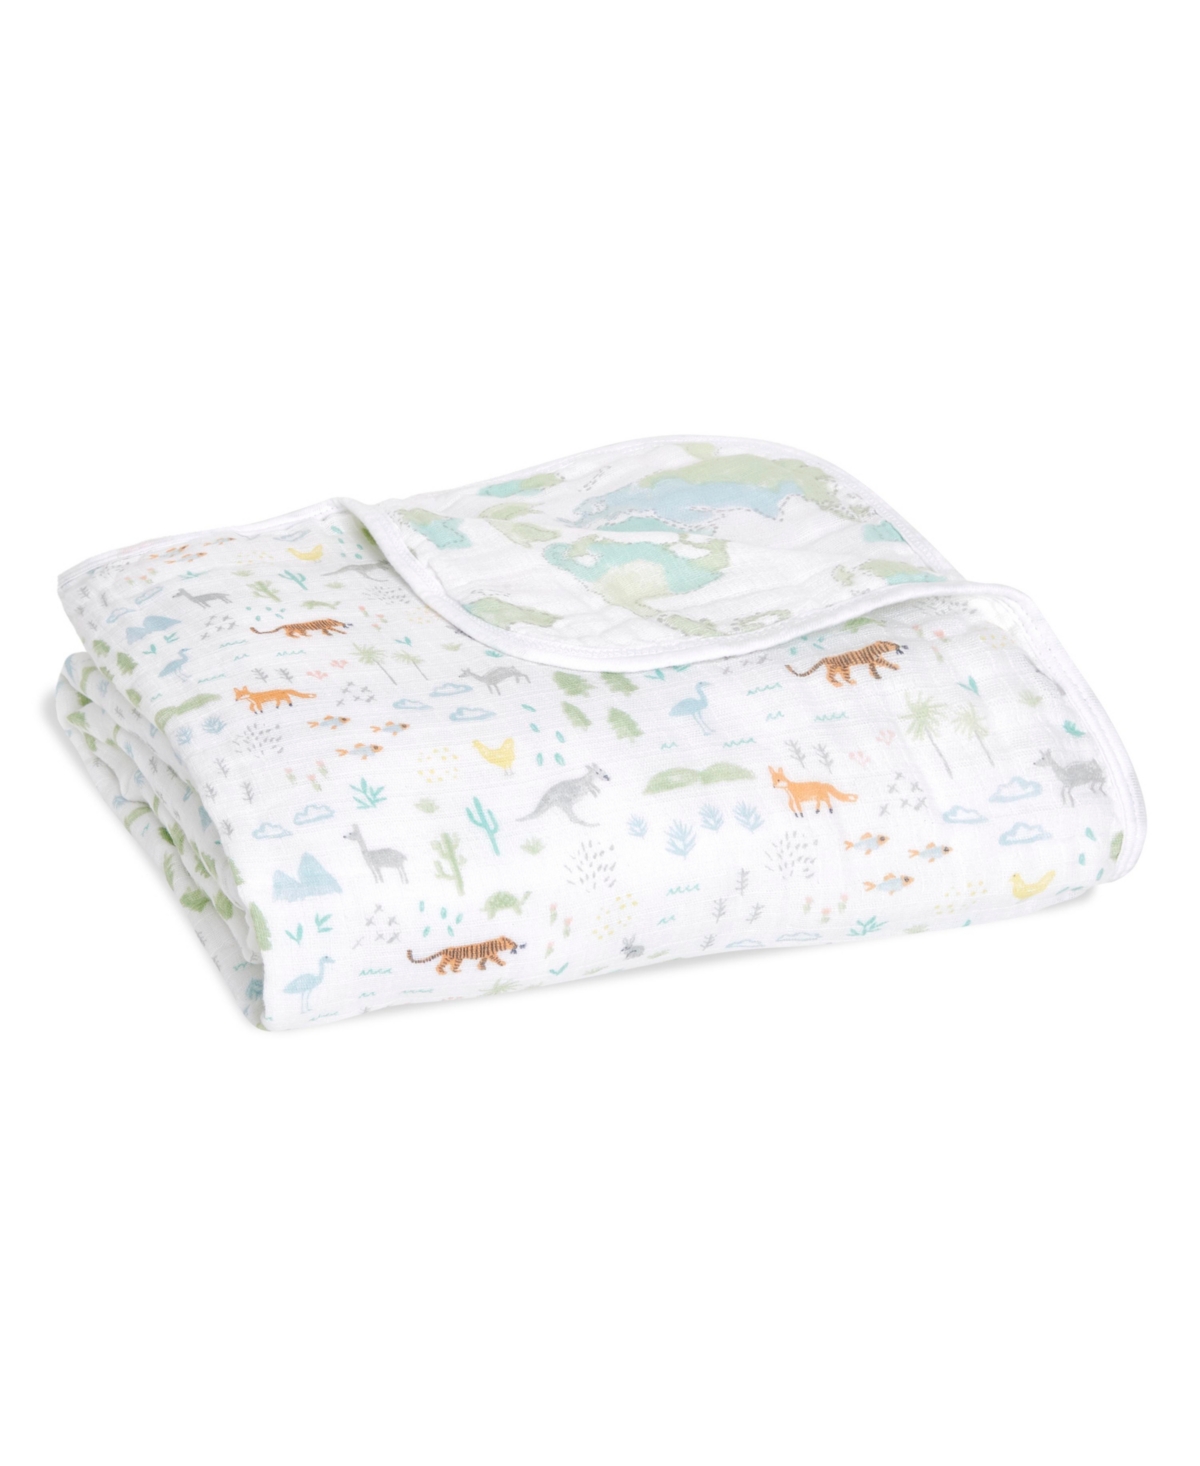 Aden By Aden + Anais Babies'  Voyager Blanket In Multi